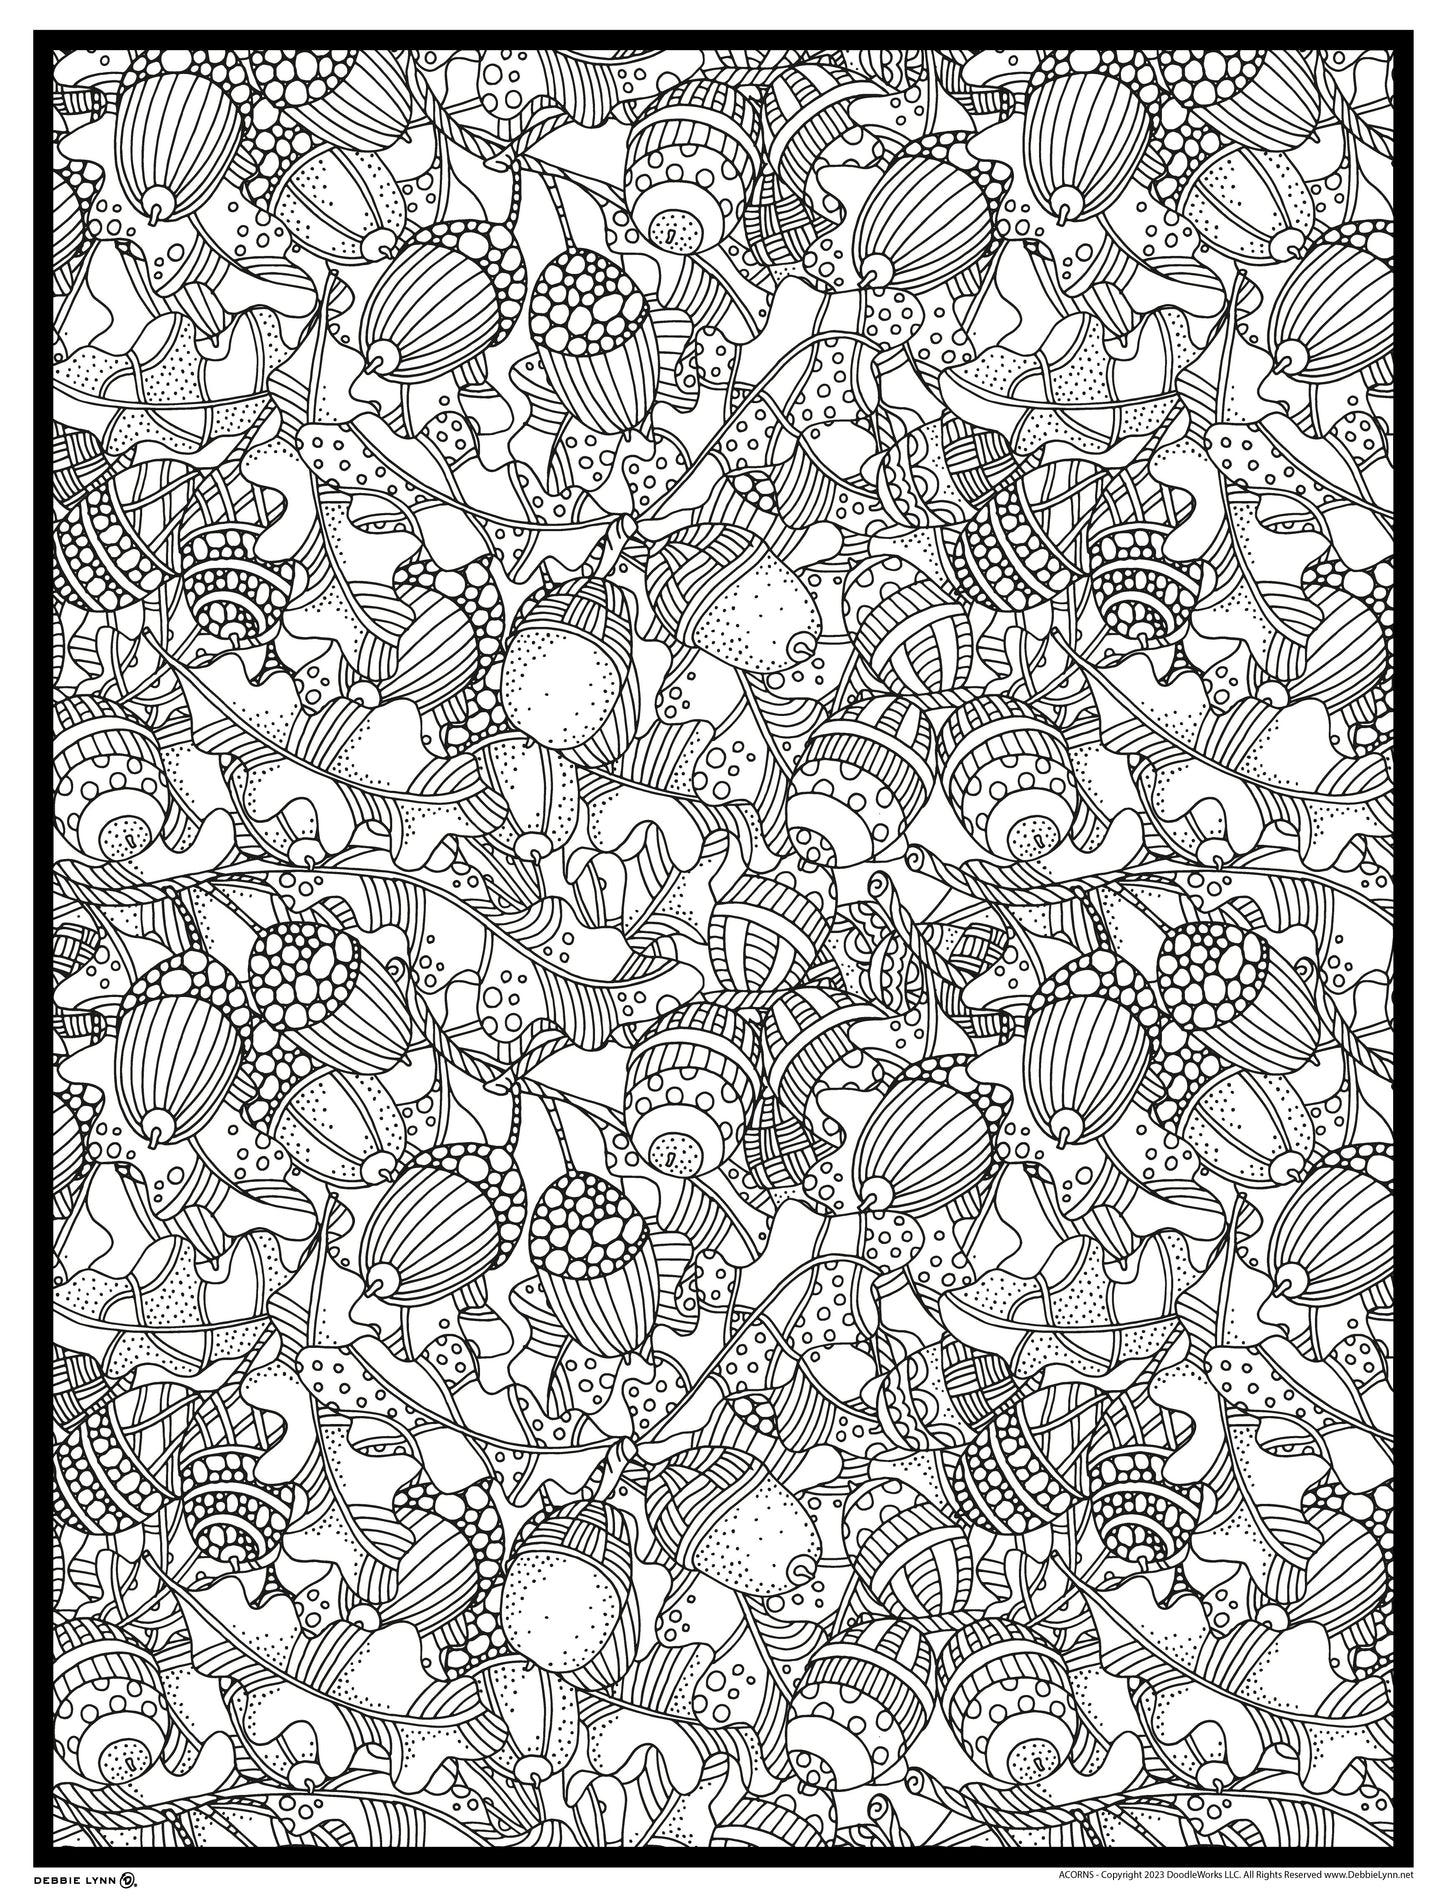 Acorns Personalized Giant Coloring Poster 46"x60"